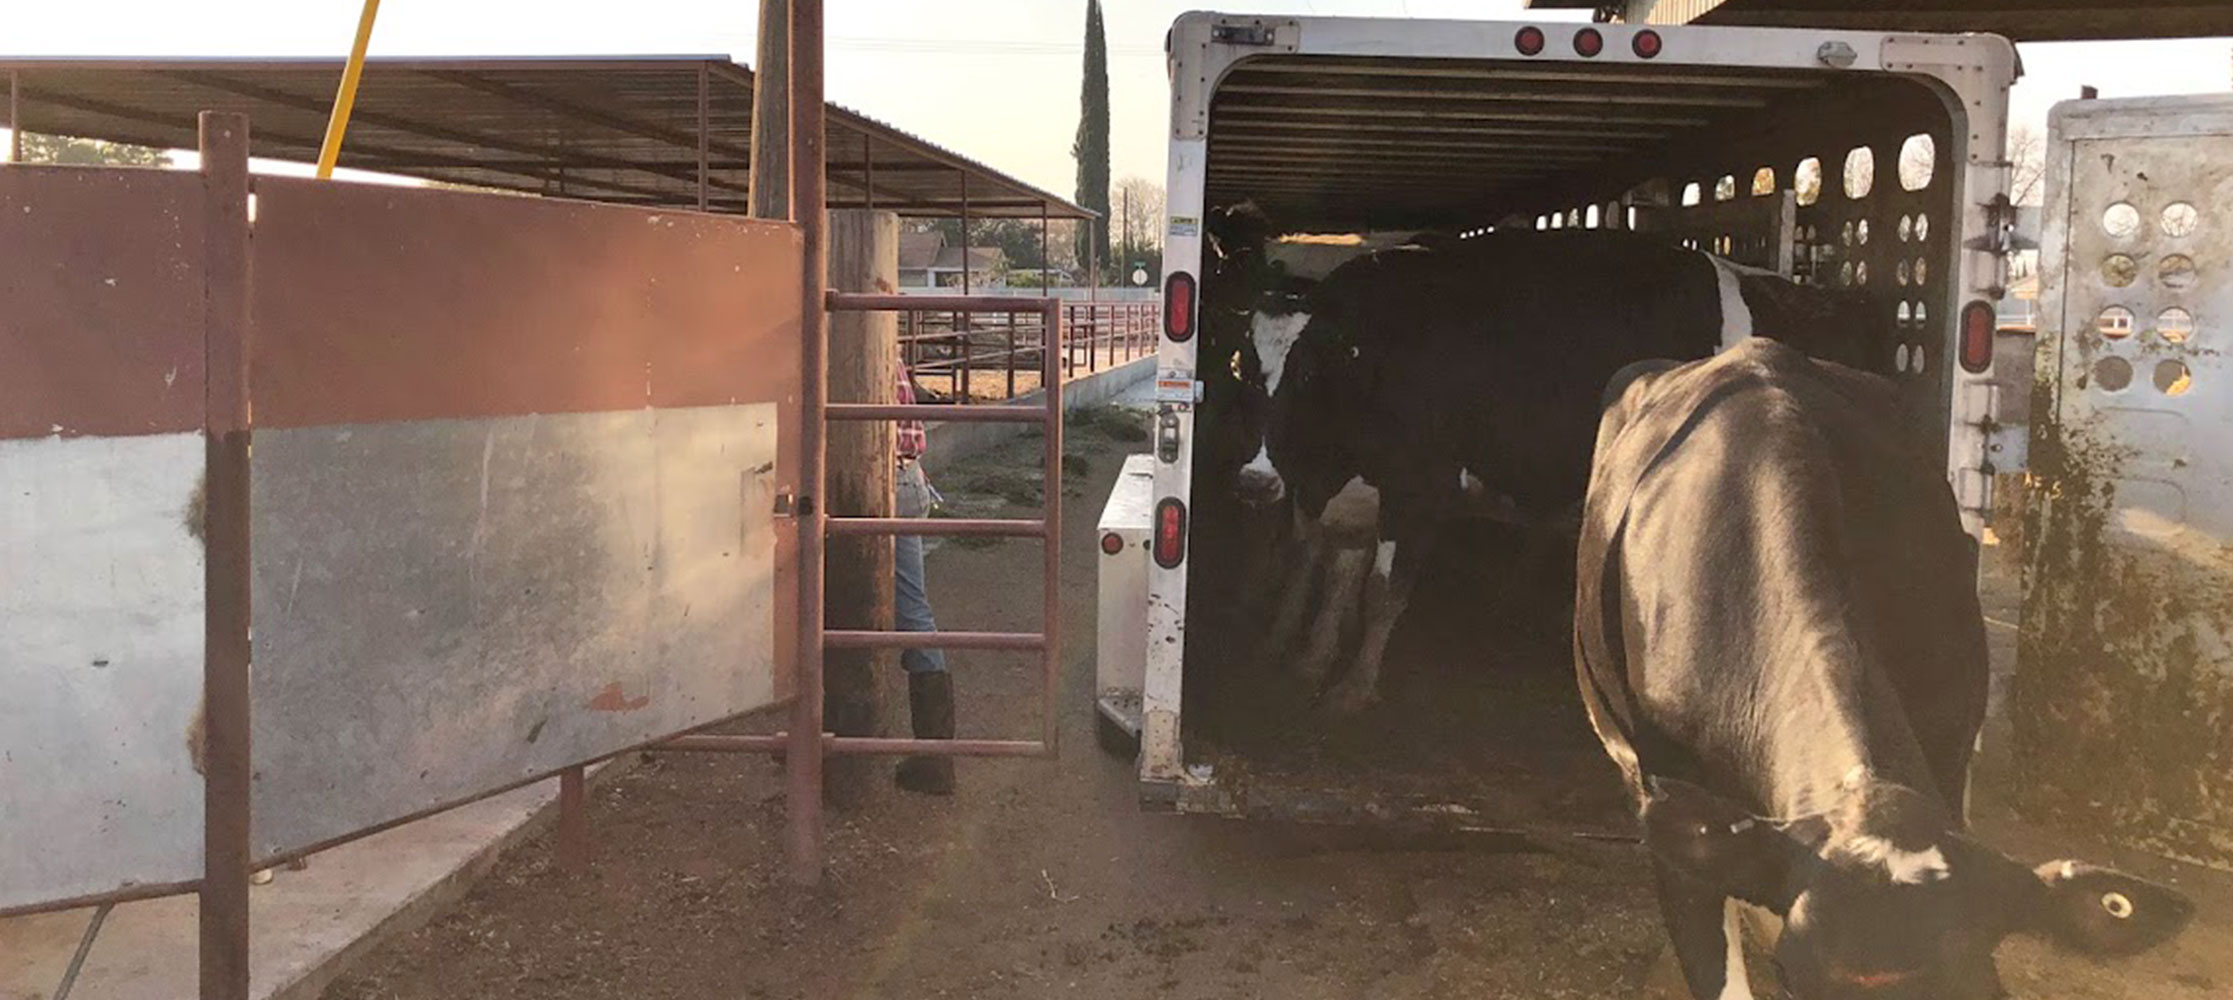 loading cows in trailer